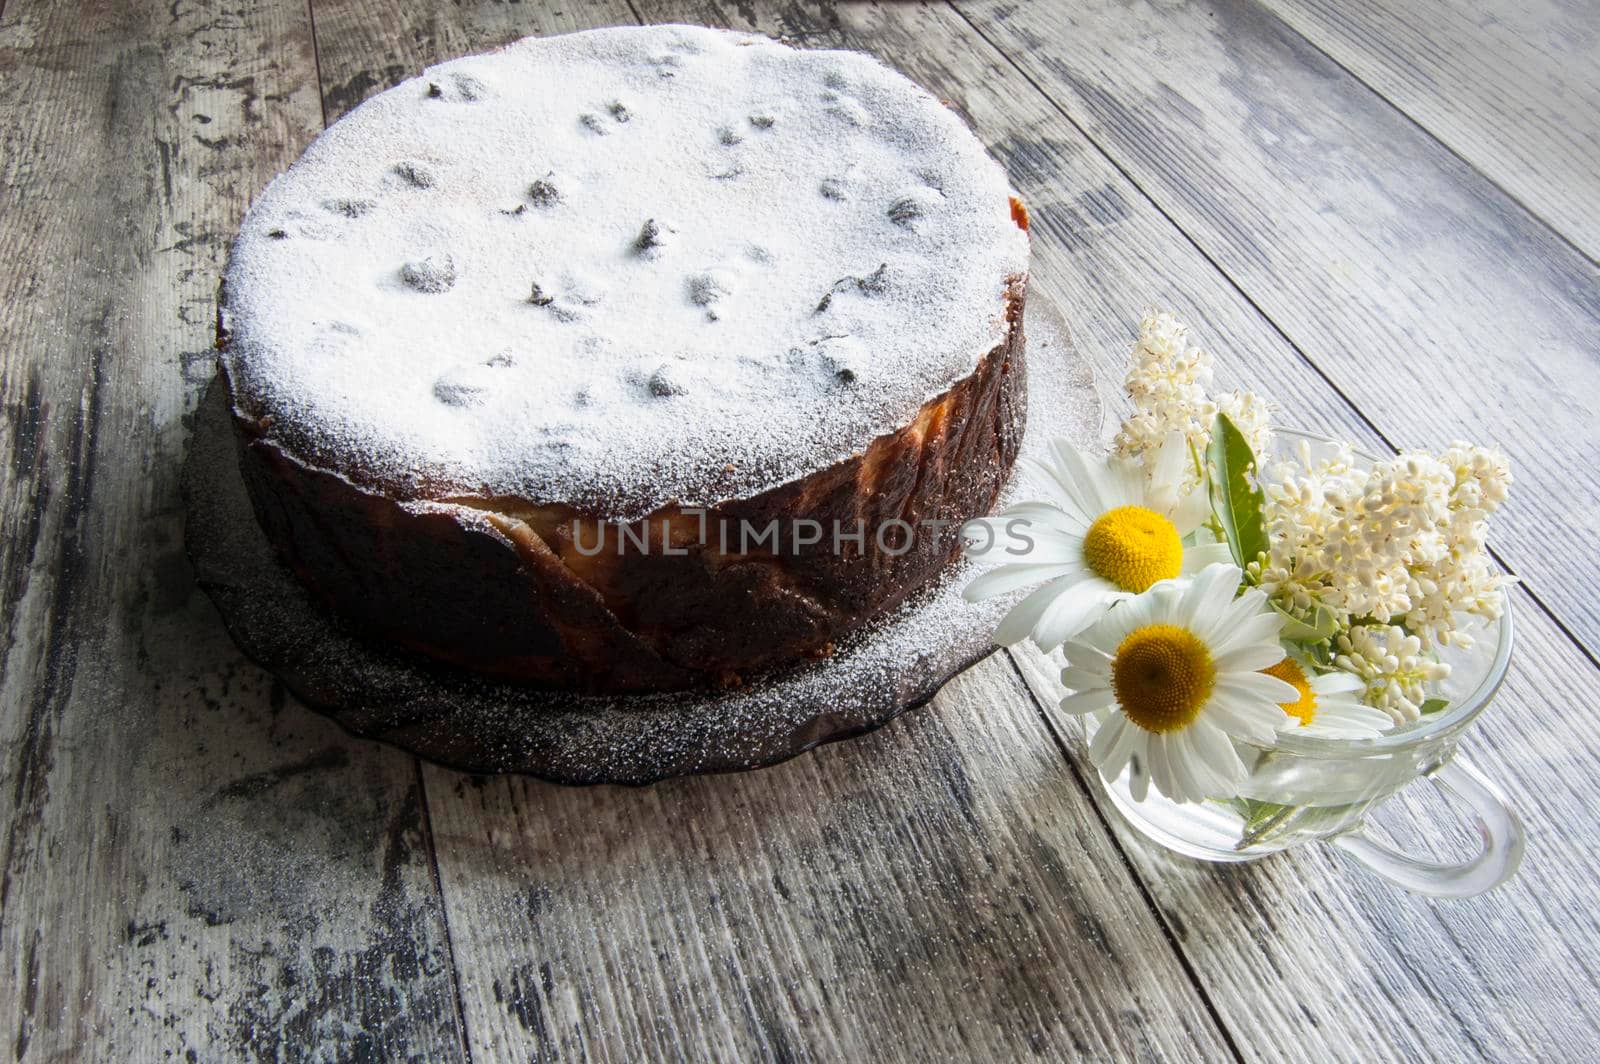 Cheesecake on an old table with a bouquet of daisies and a form for baking. Retro style. From the series "Still Life with cheesecake"